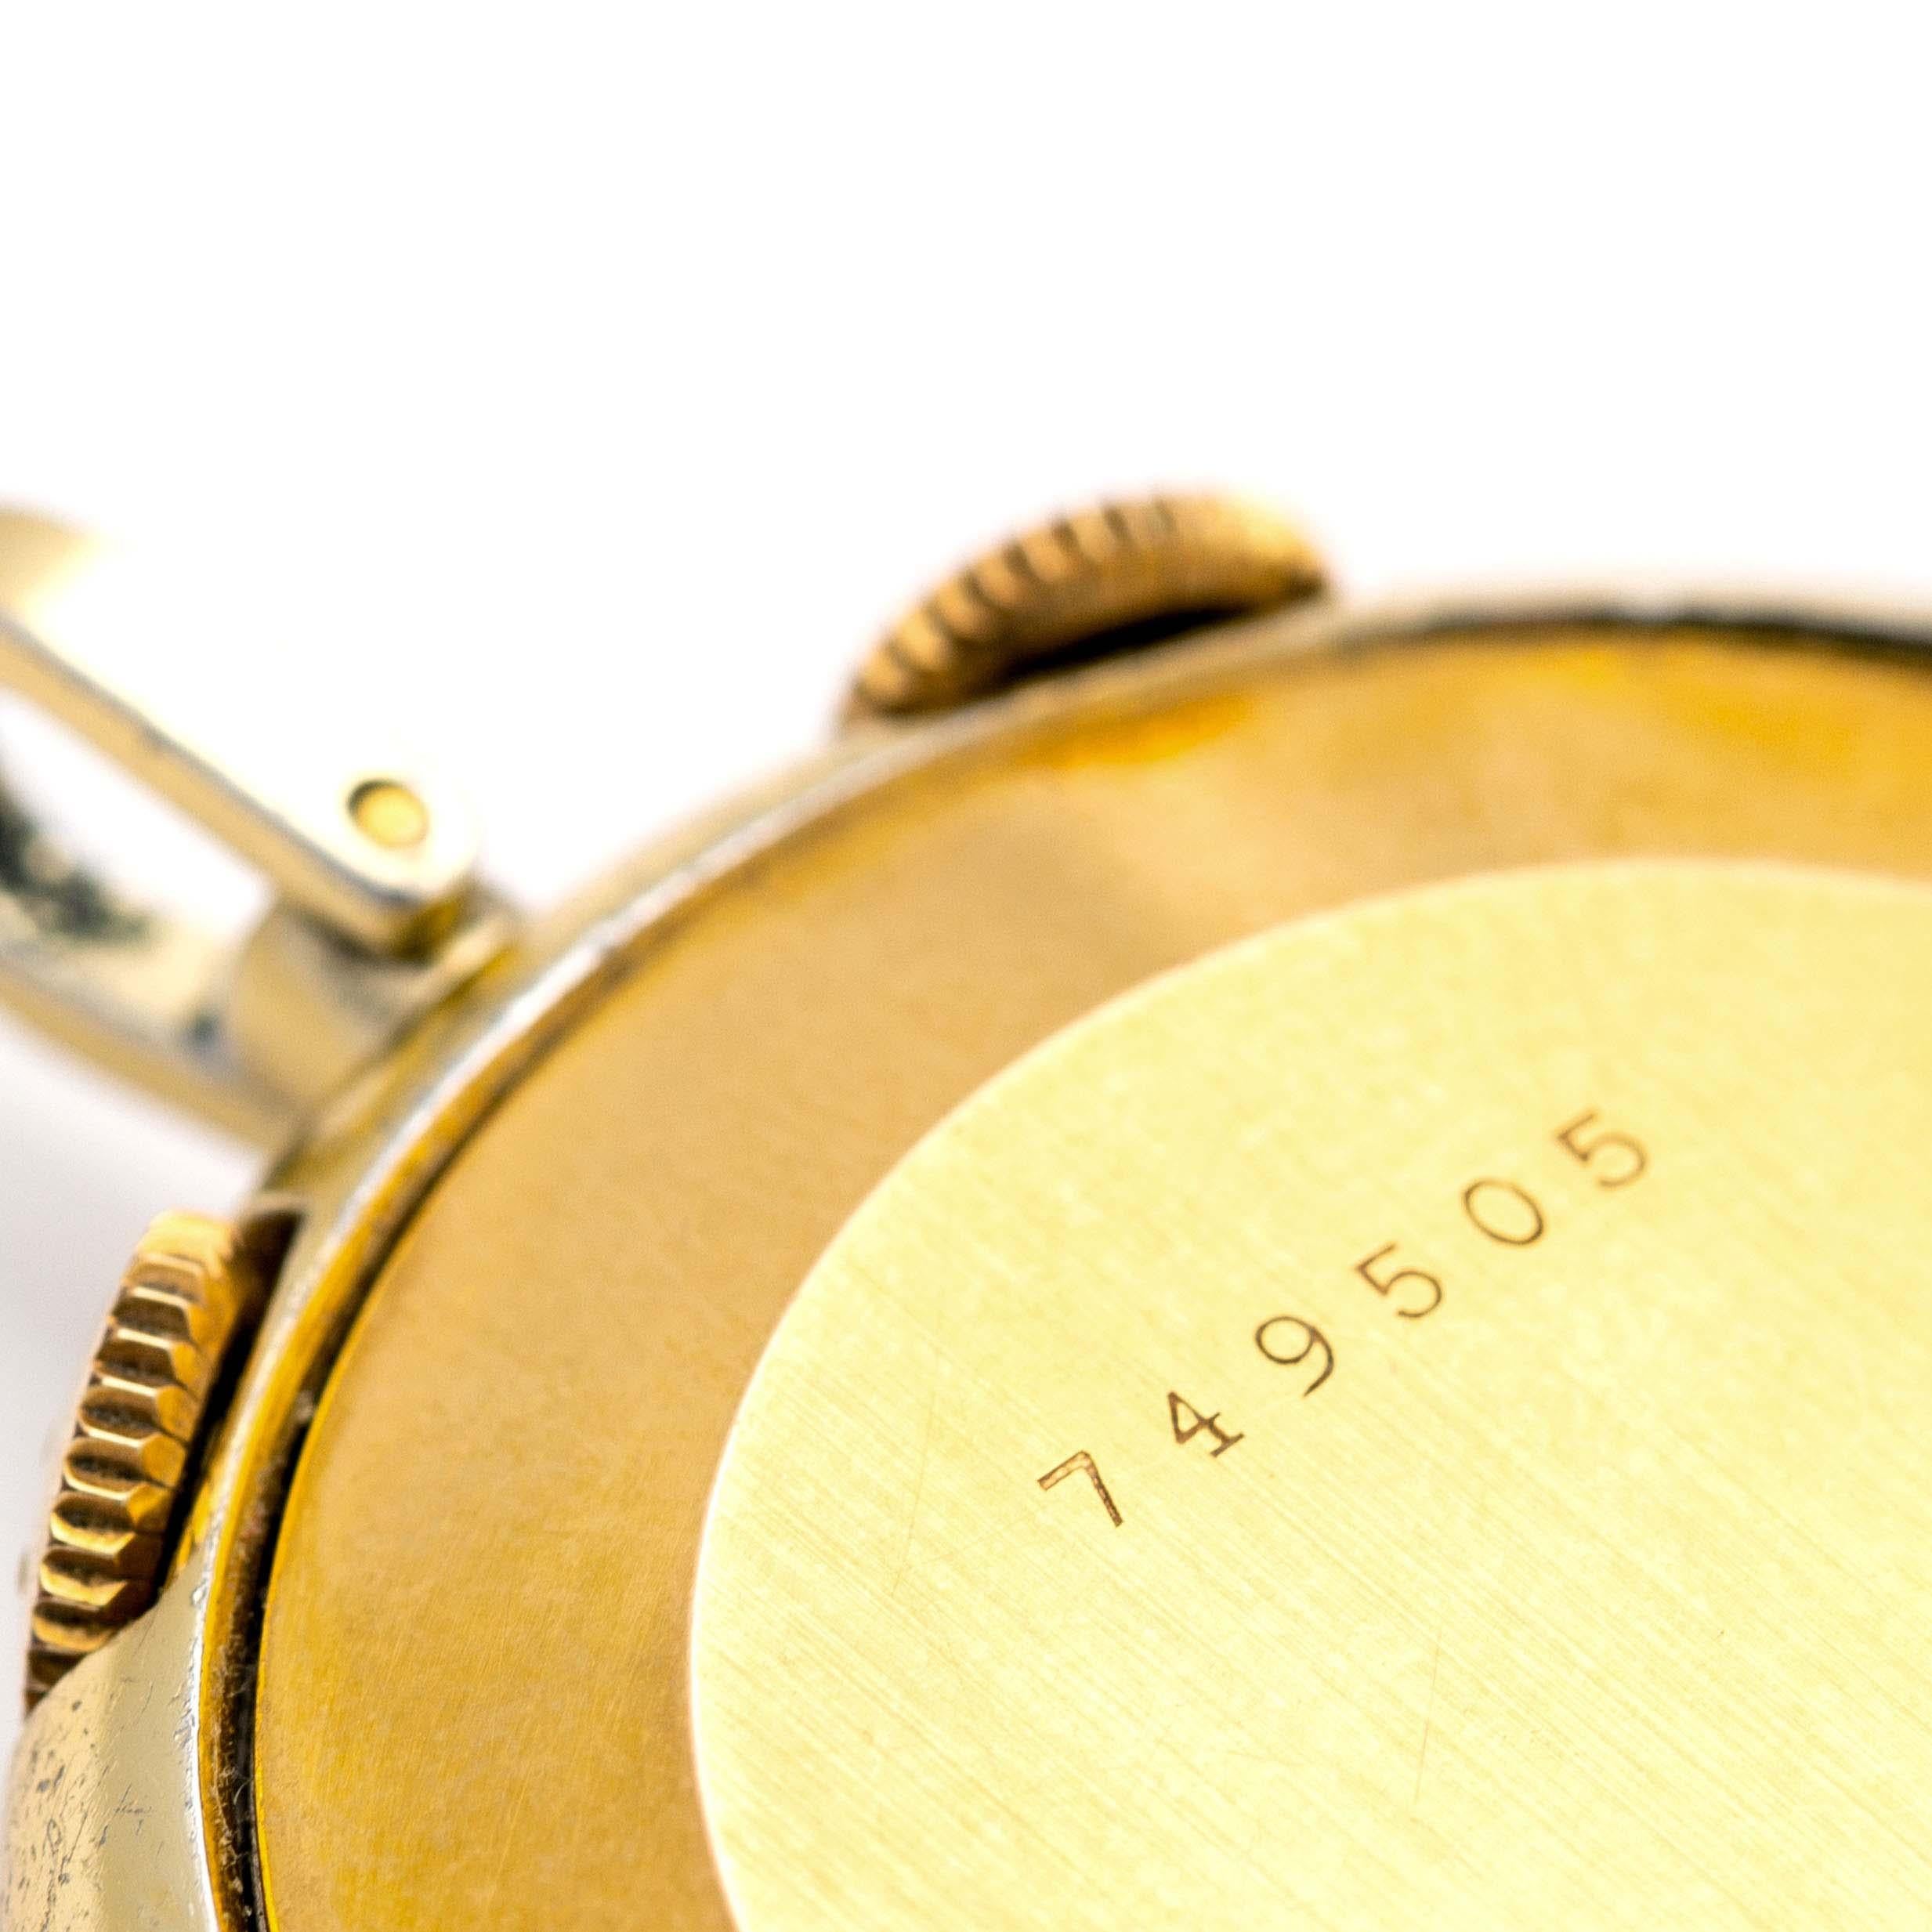 Jaeger-LeCoultre. Gold-Plated Metal Pocket Watch For Sale 5